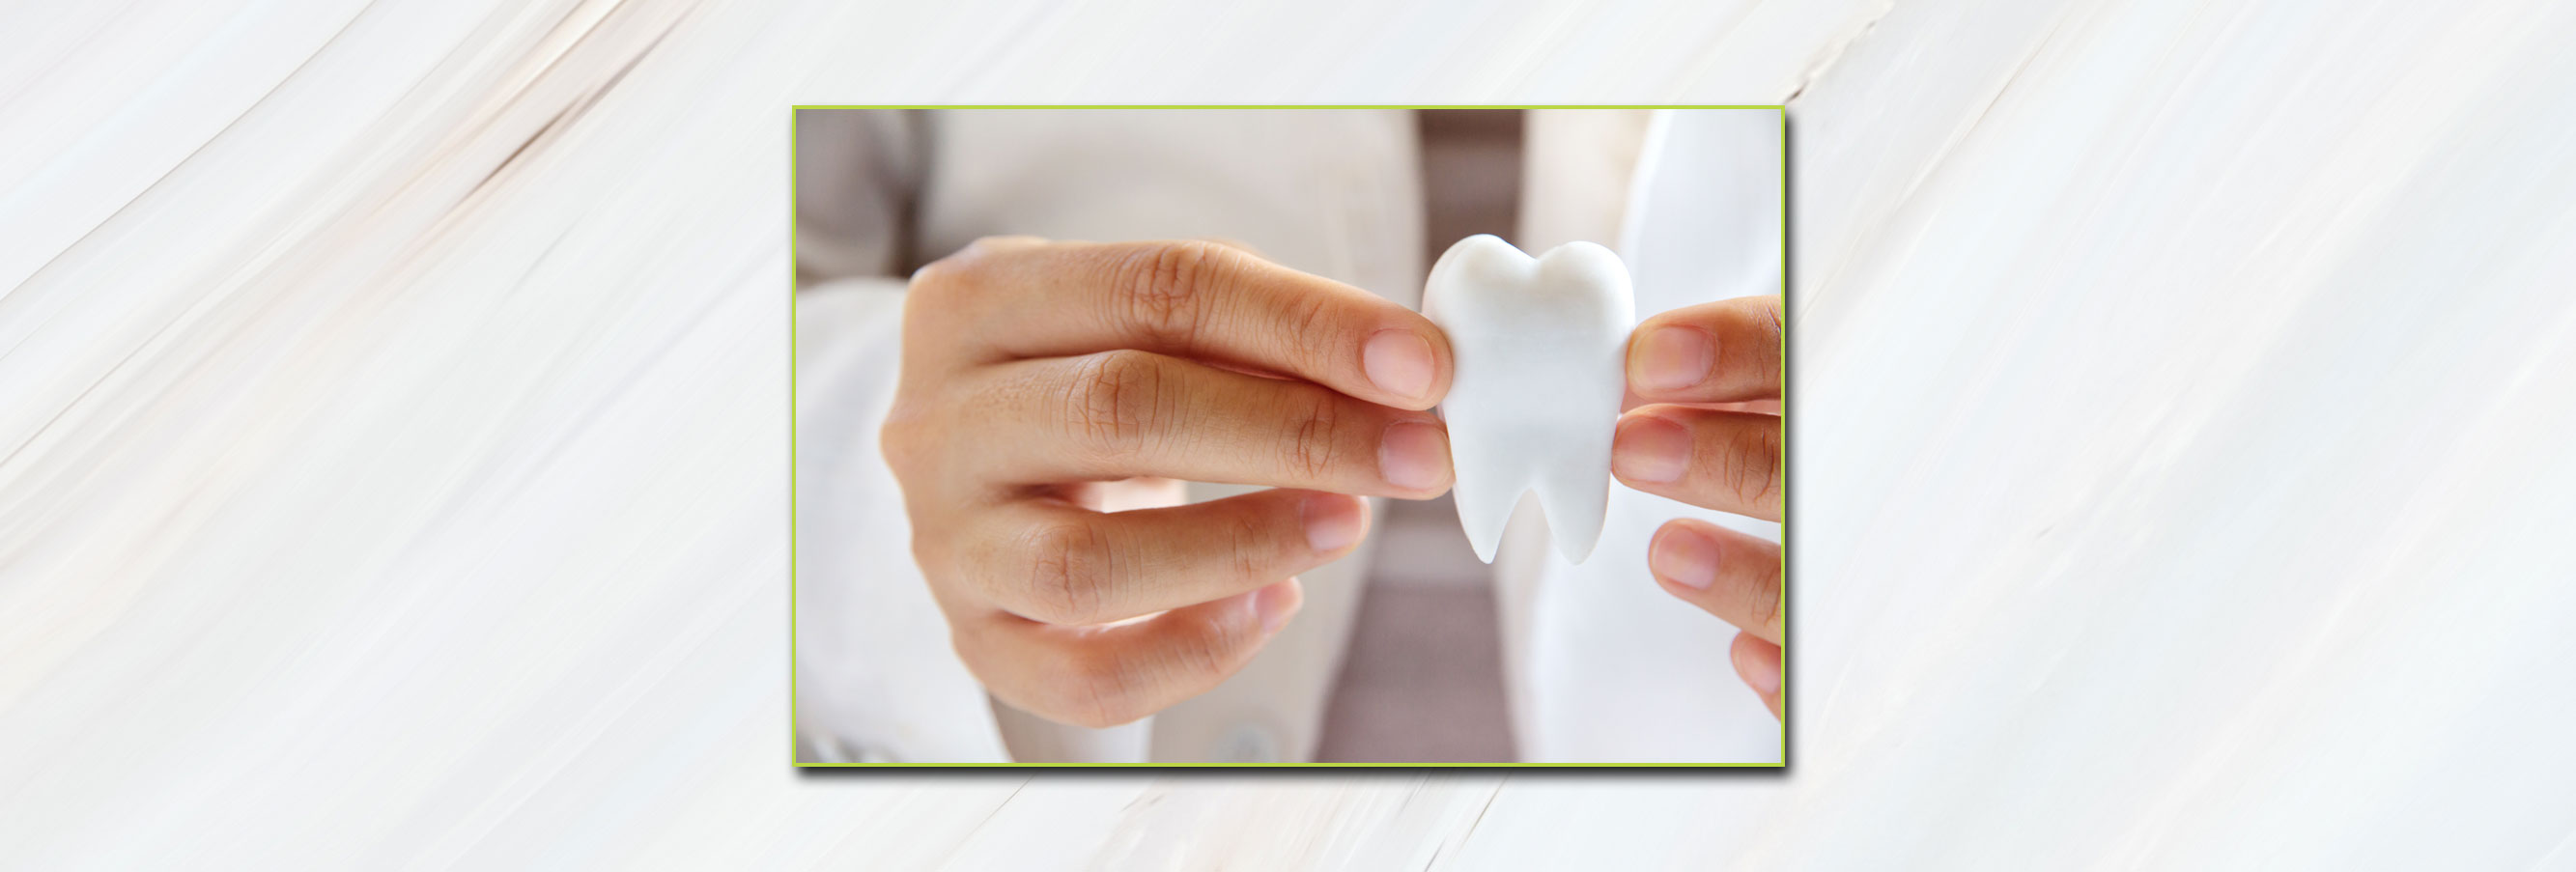 Dentist Holding Tooth Model